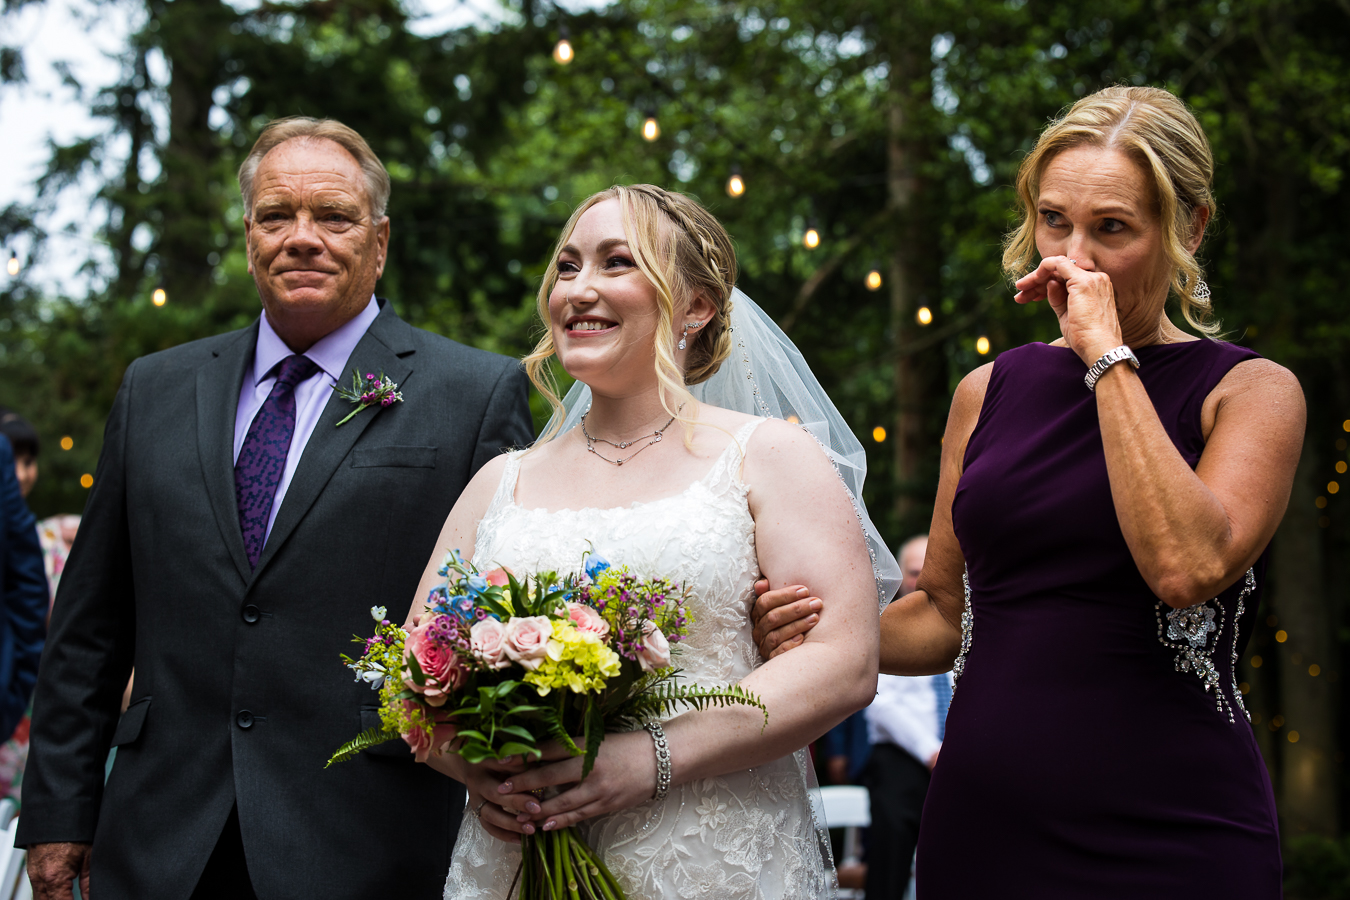 candid image of the bride walking down the aisle with both her mom and dad as mom starts to tear up as they walk down the aisle 